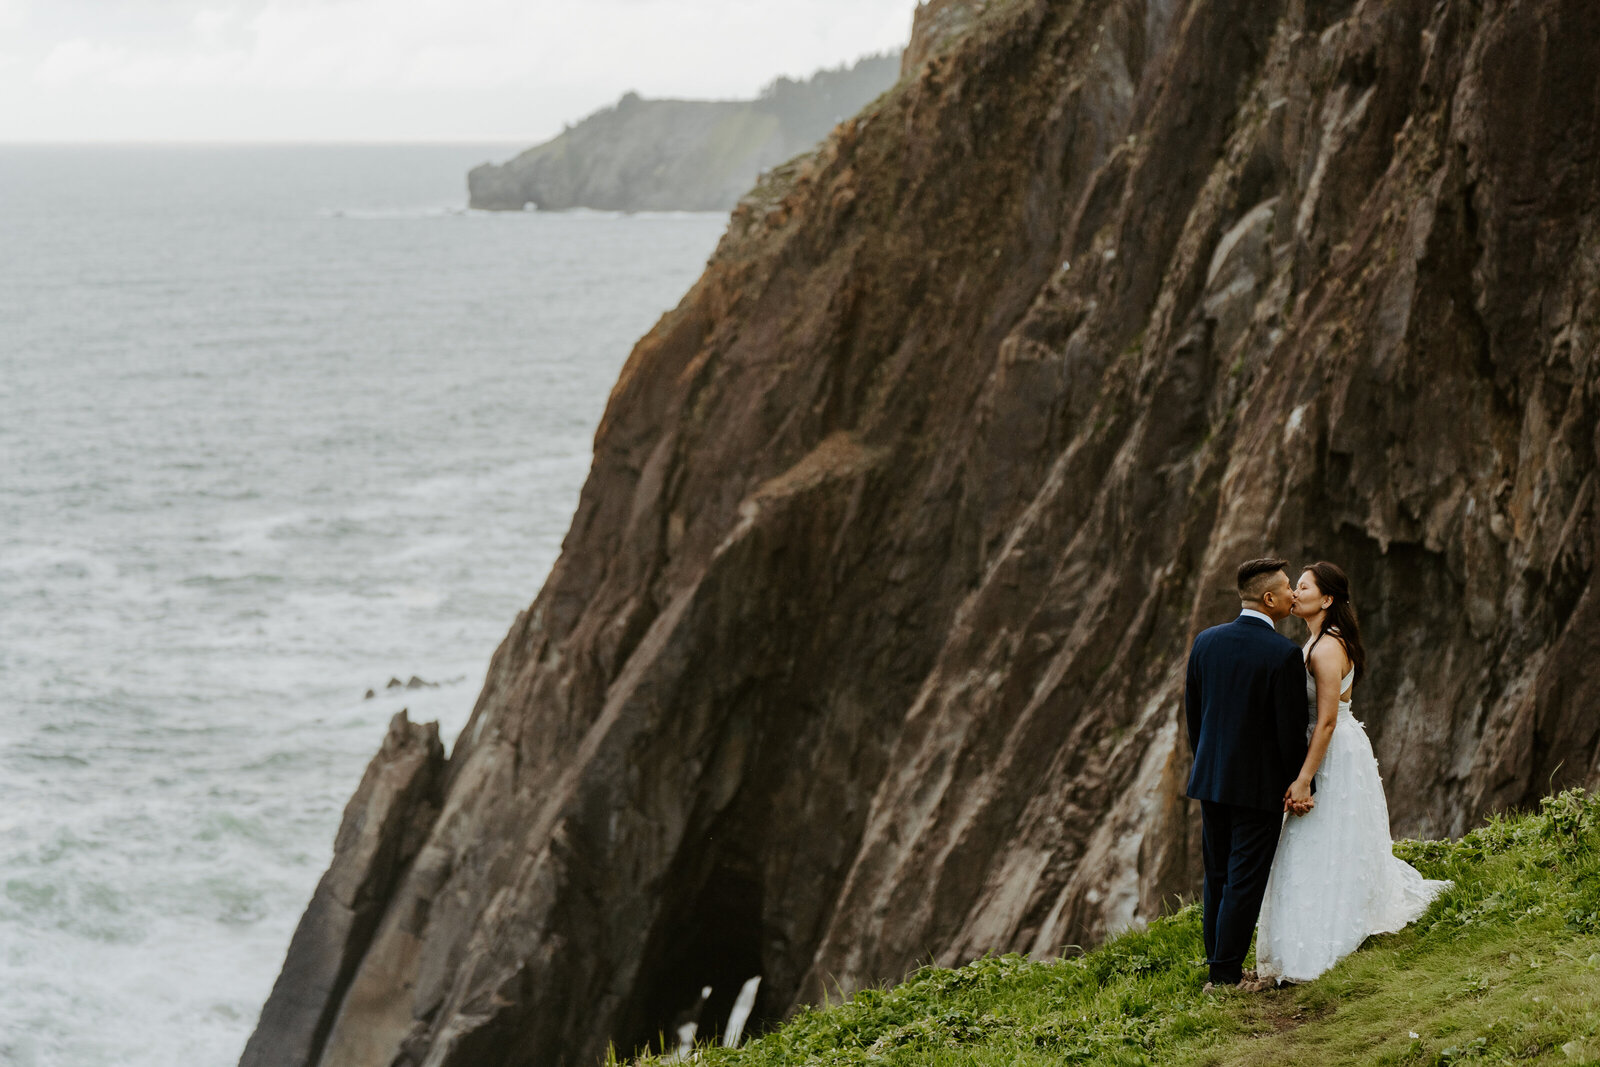 Bride and groom hugging in wedding attire on a grassy hillside with sheer rock cliffs and the Pacific Ocean in the background